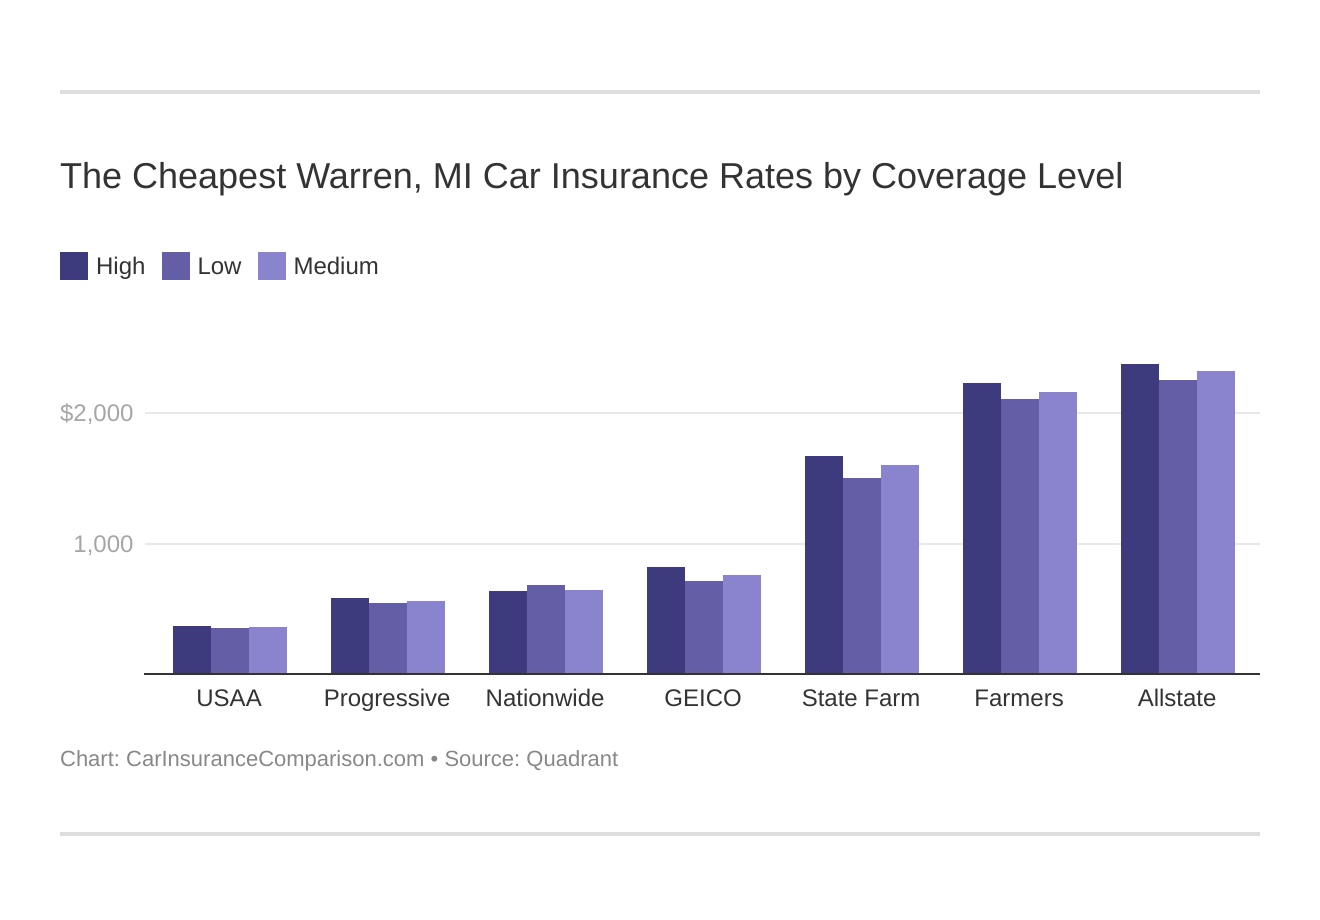 The Cheapest Warren, MI Car Insurance Rates by Coverage Level